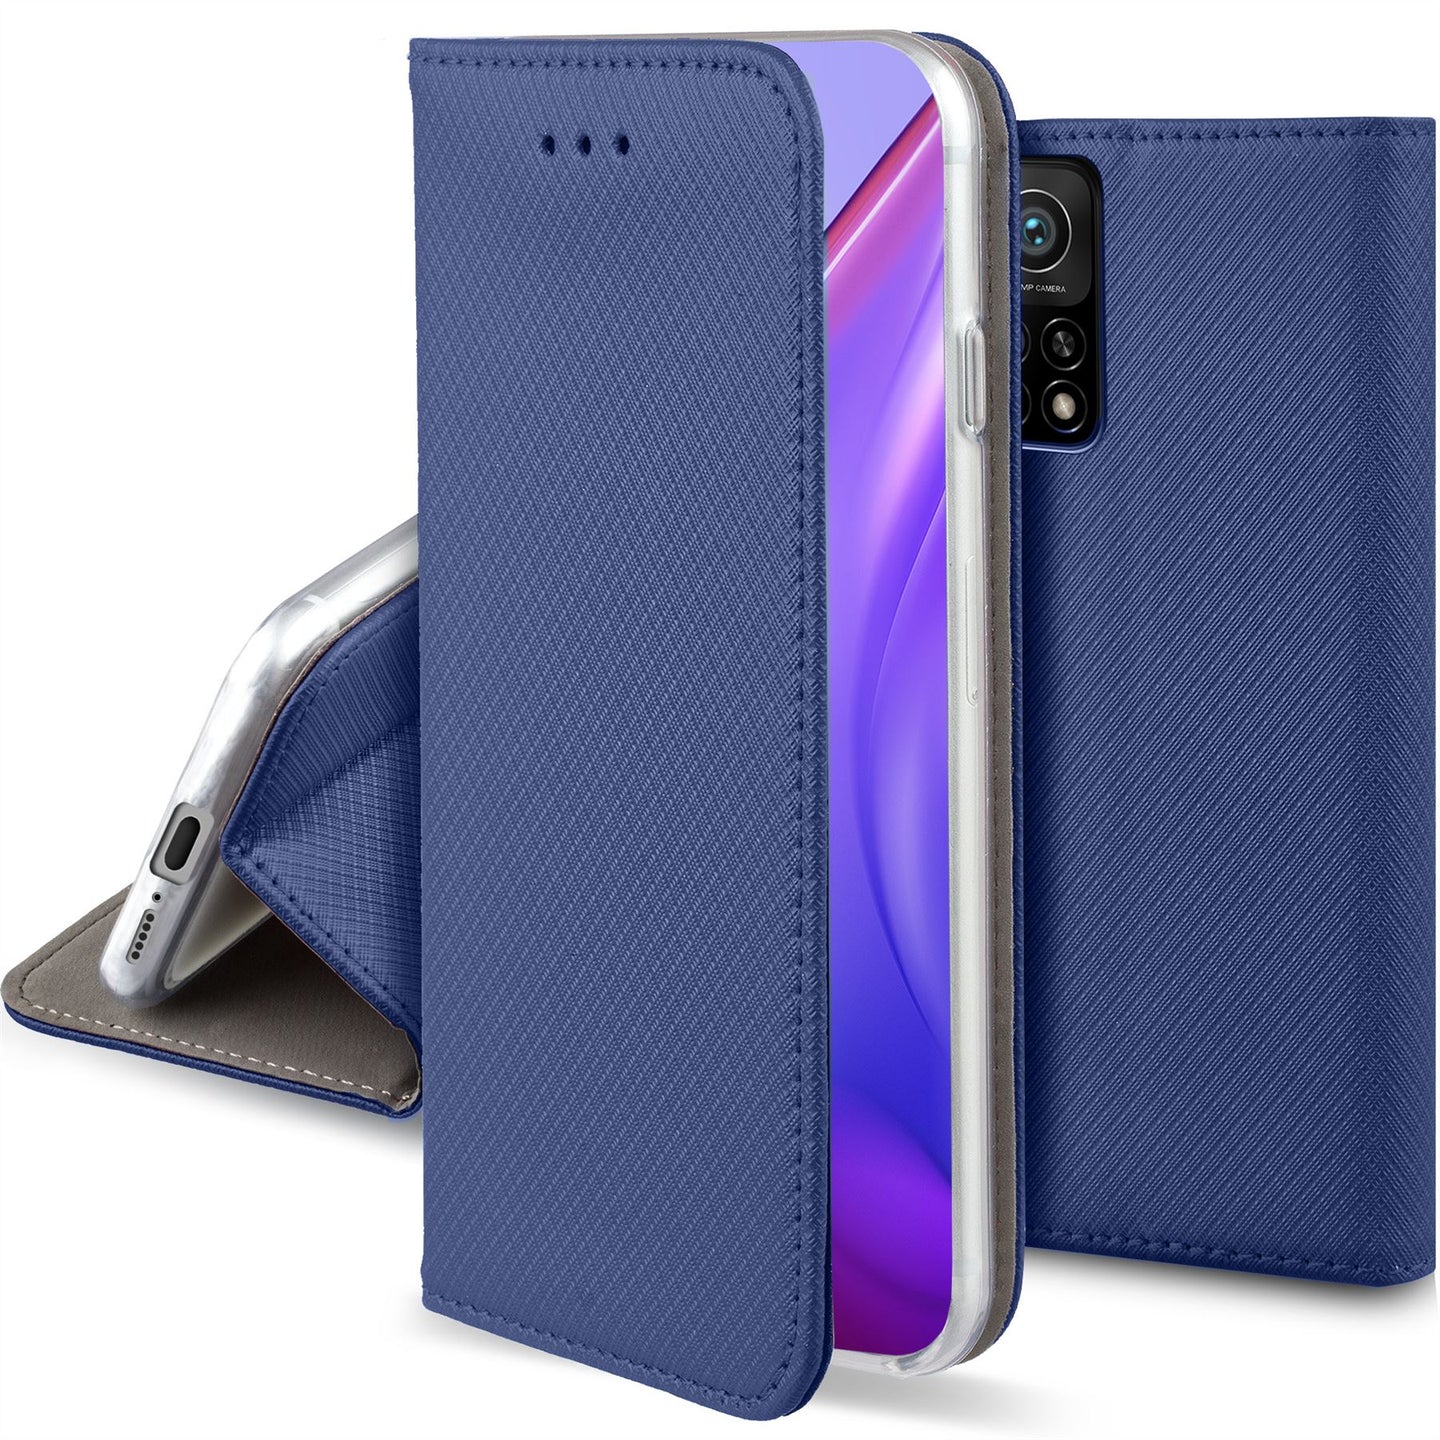 Moozy Case Flip Cover for Xiaomi Mi 10T 5G and Mi 10T Pro 5G, Dark Blue - Smart Magnetic Flip Case with Card Holder and Stand